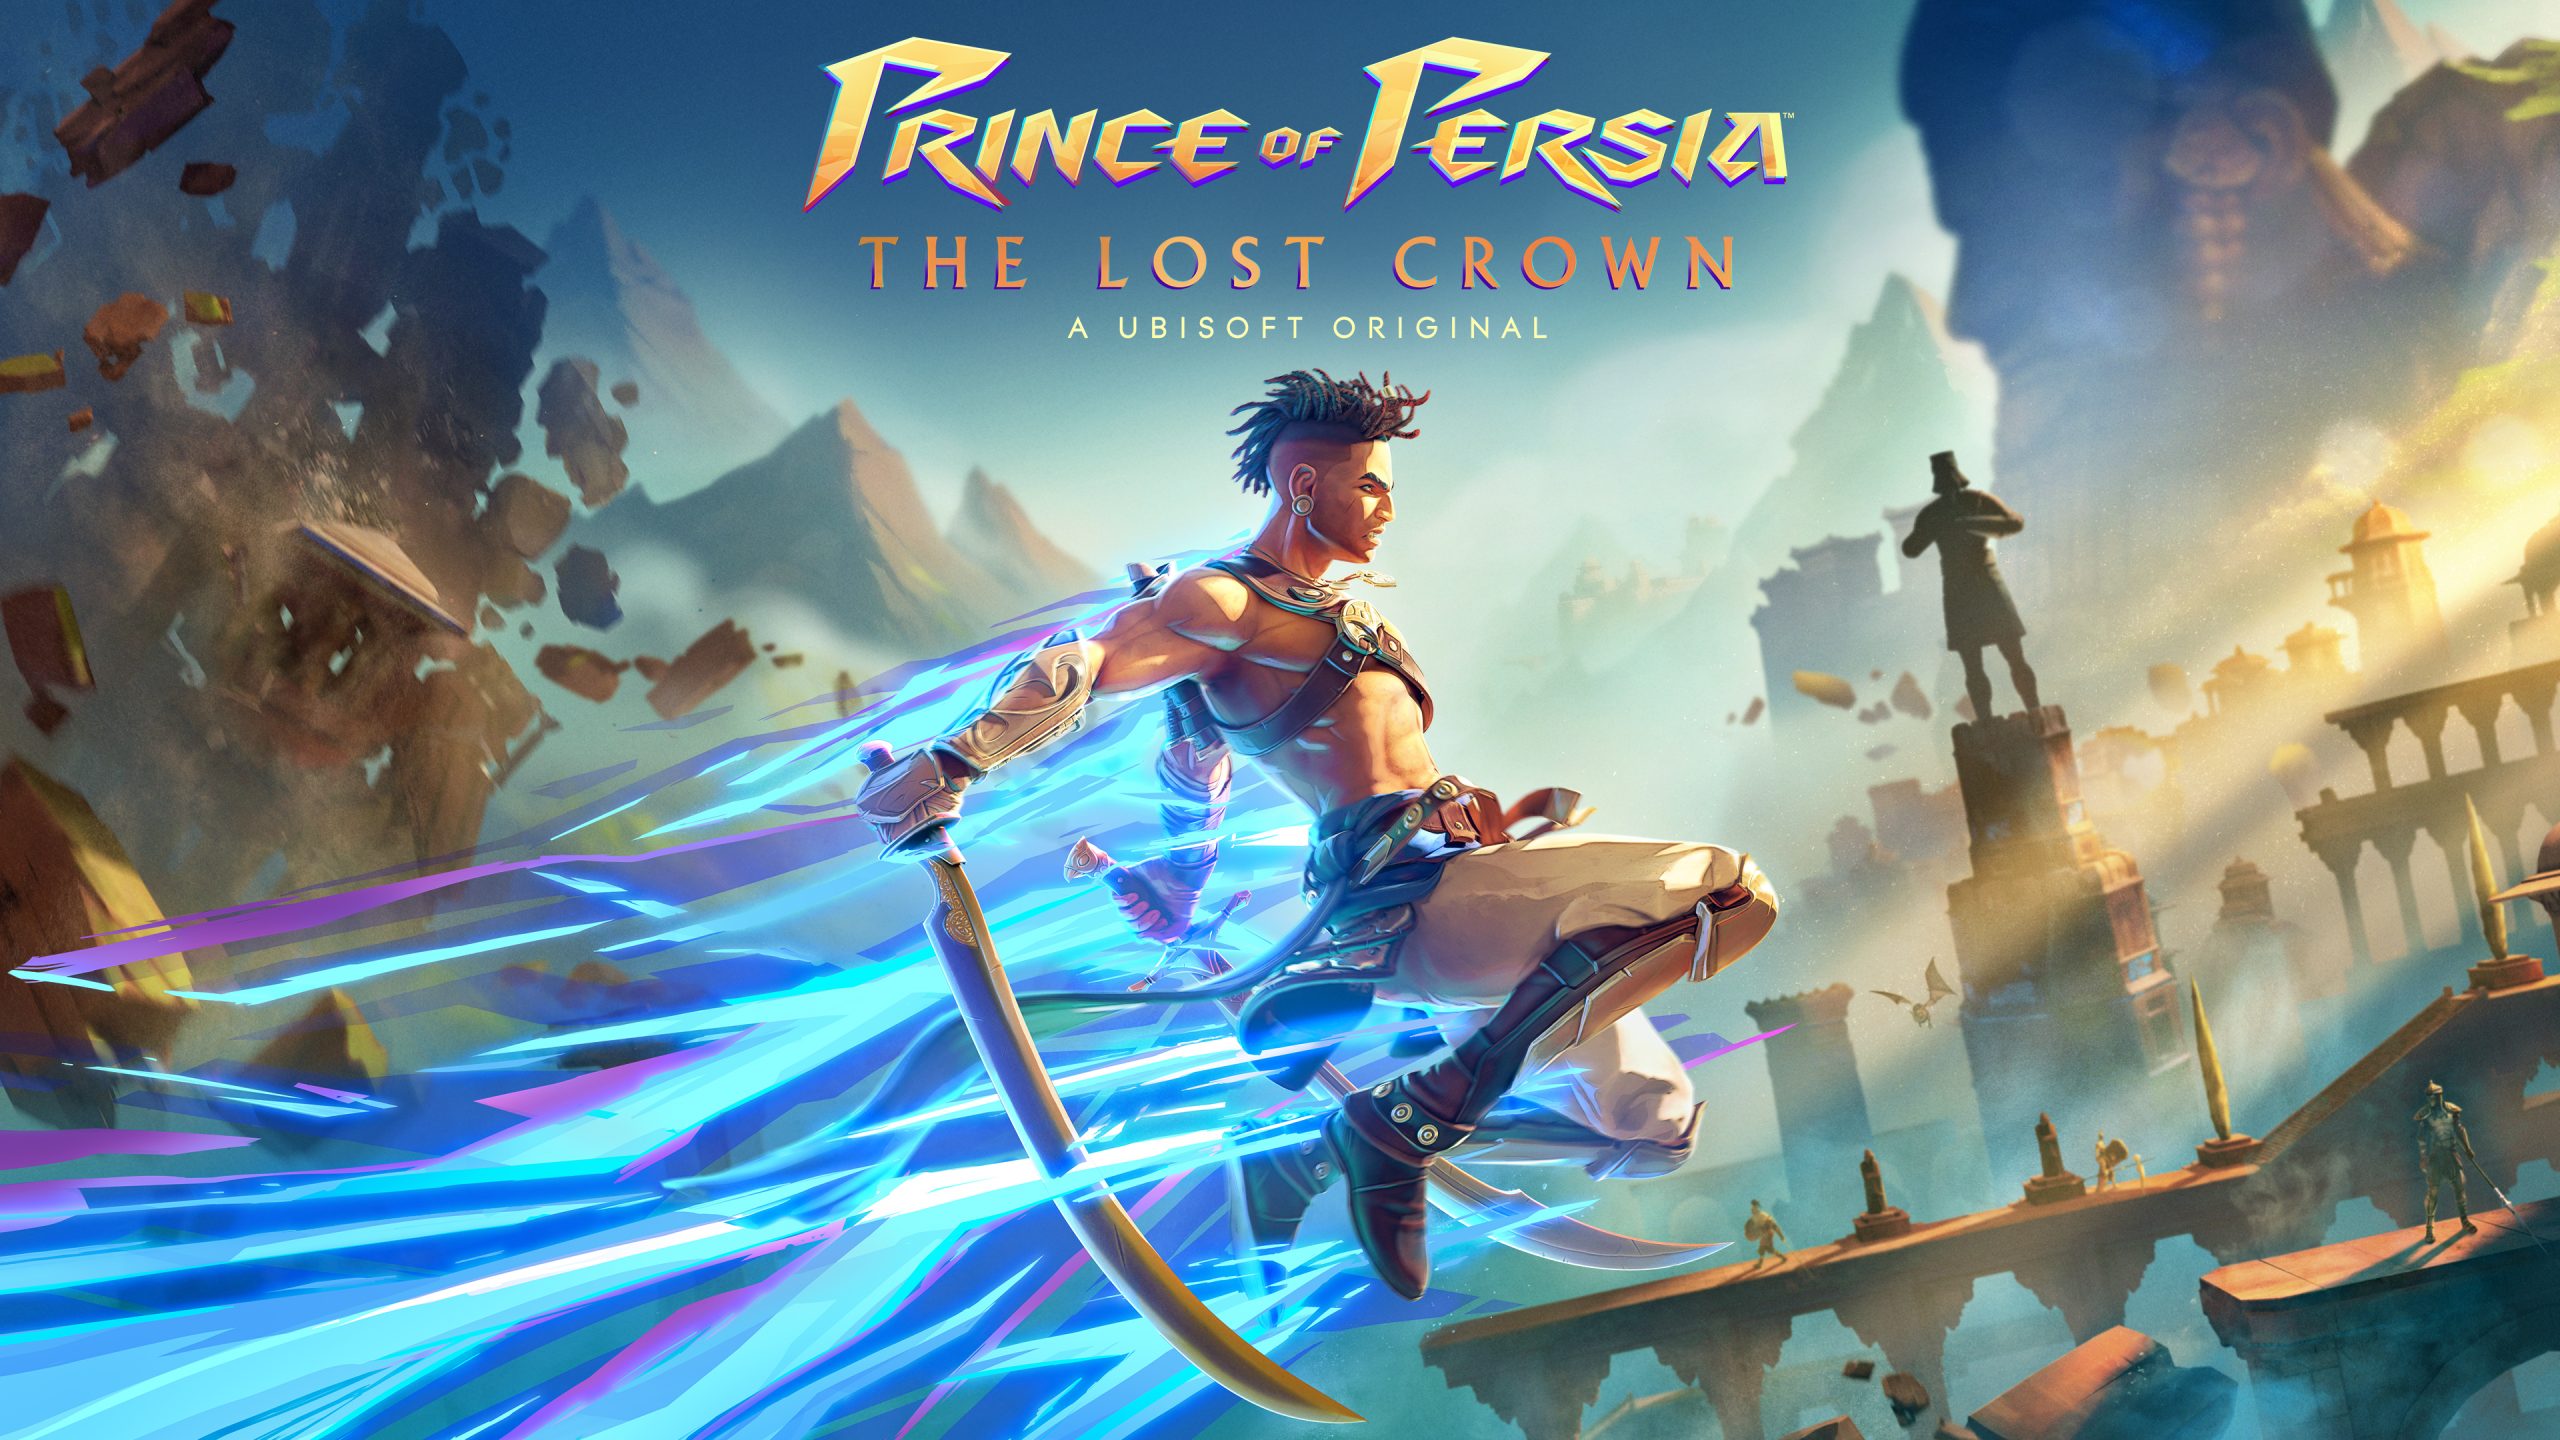 Prince of Persia The Lost Crown Goes Gold Ahead of Launch Next Month